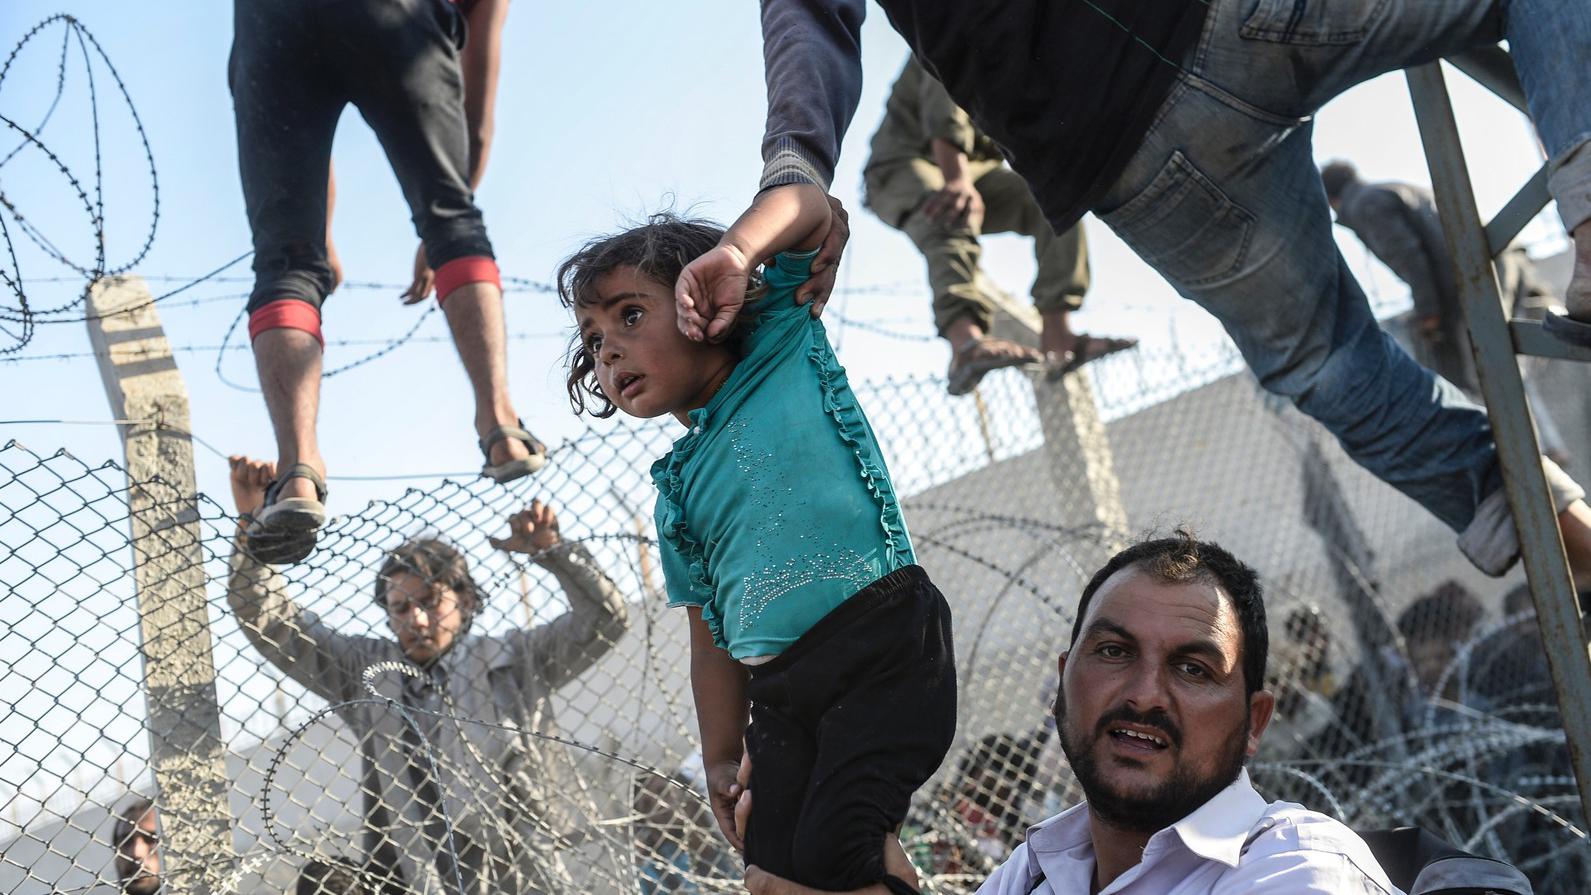 Syrian refugees climbing over border fences to enter Turkish territory illegally after fleeing their home.–AFP